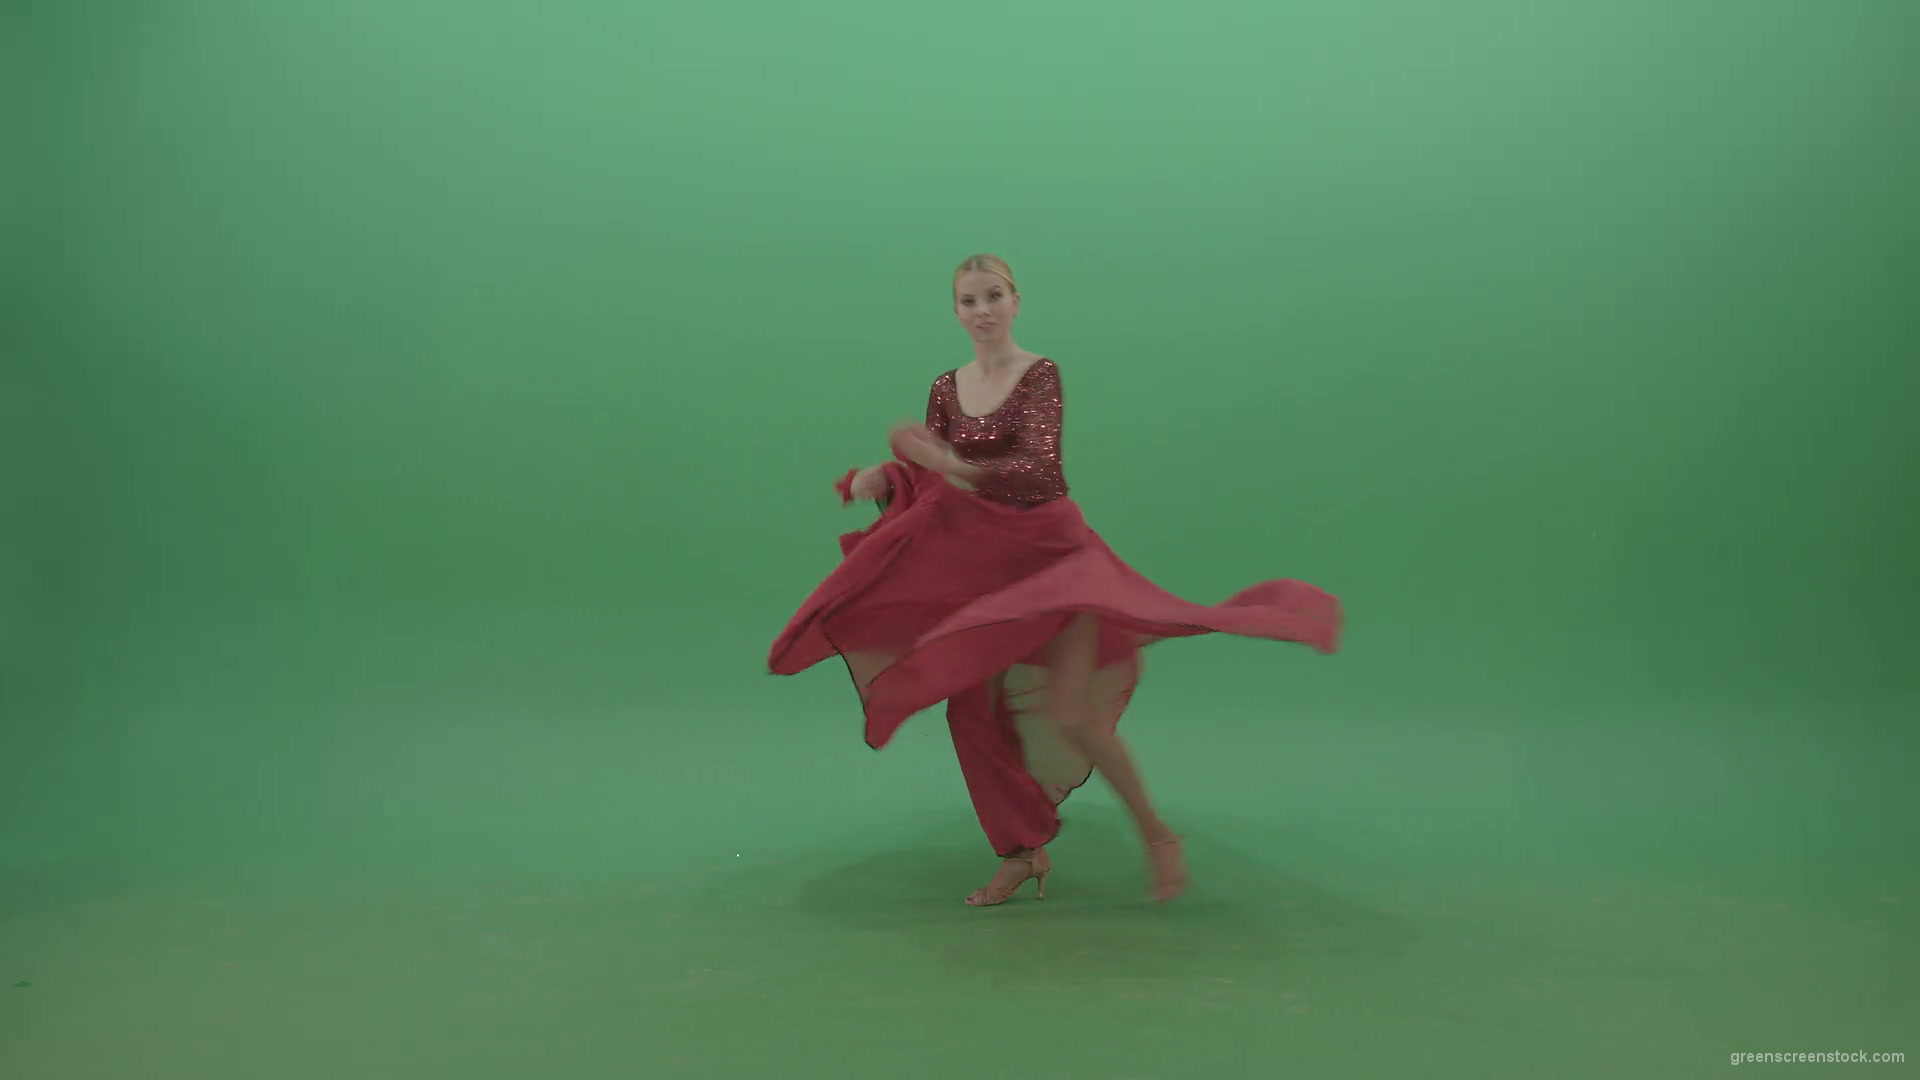 Spinning-woman-in-red-dress-showing-dance-flamenco-moves-over-green-screen-4K-Video-Footage-1920_002 Green Screen Stock